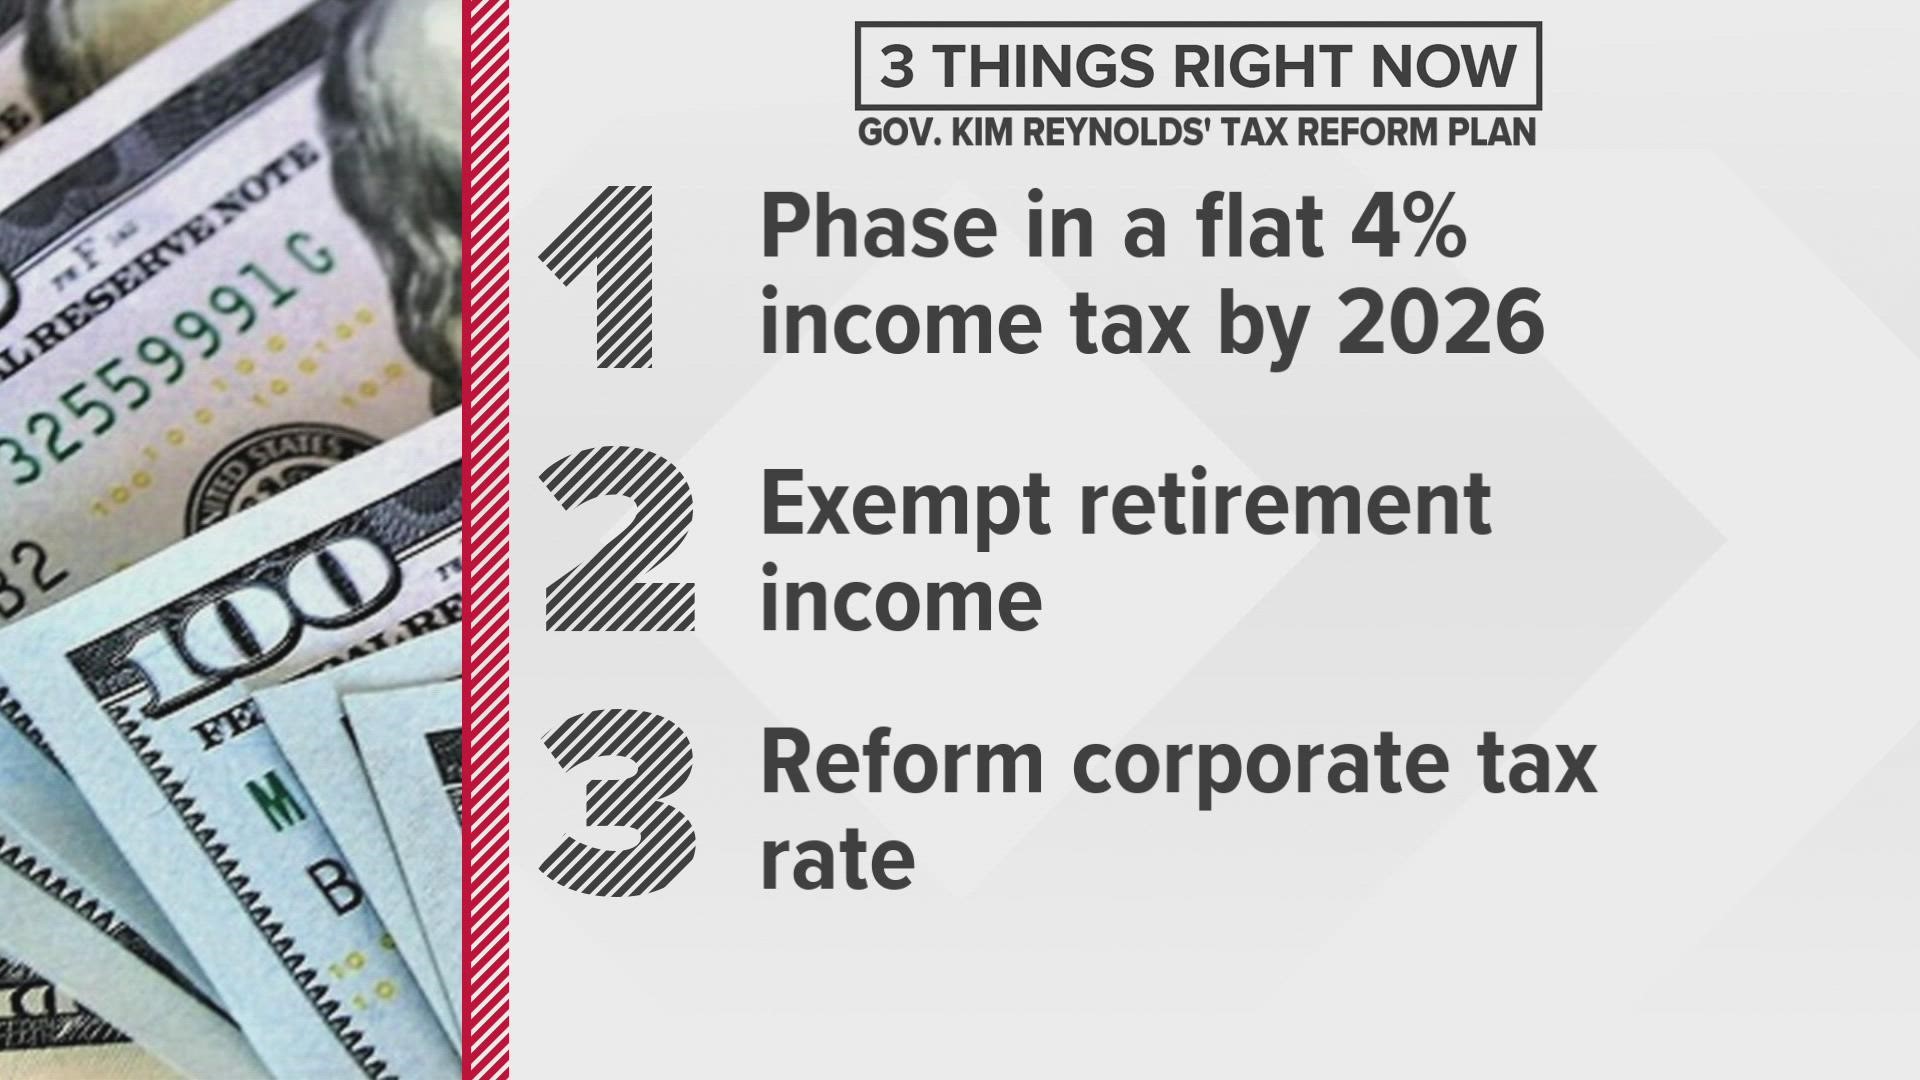 While Republicans in the House and Senate are also pushing for income and retirement tax reform, there are some discrepancies in the details.